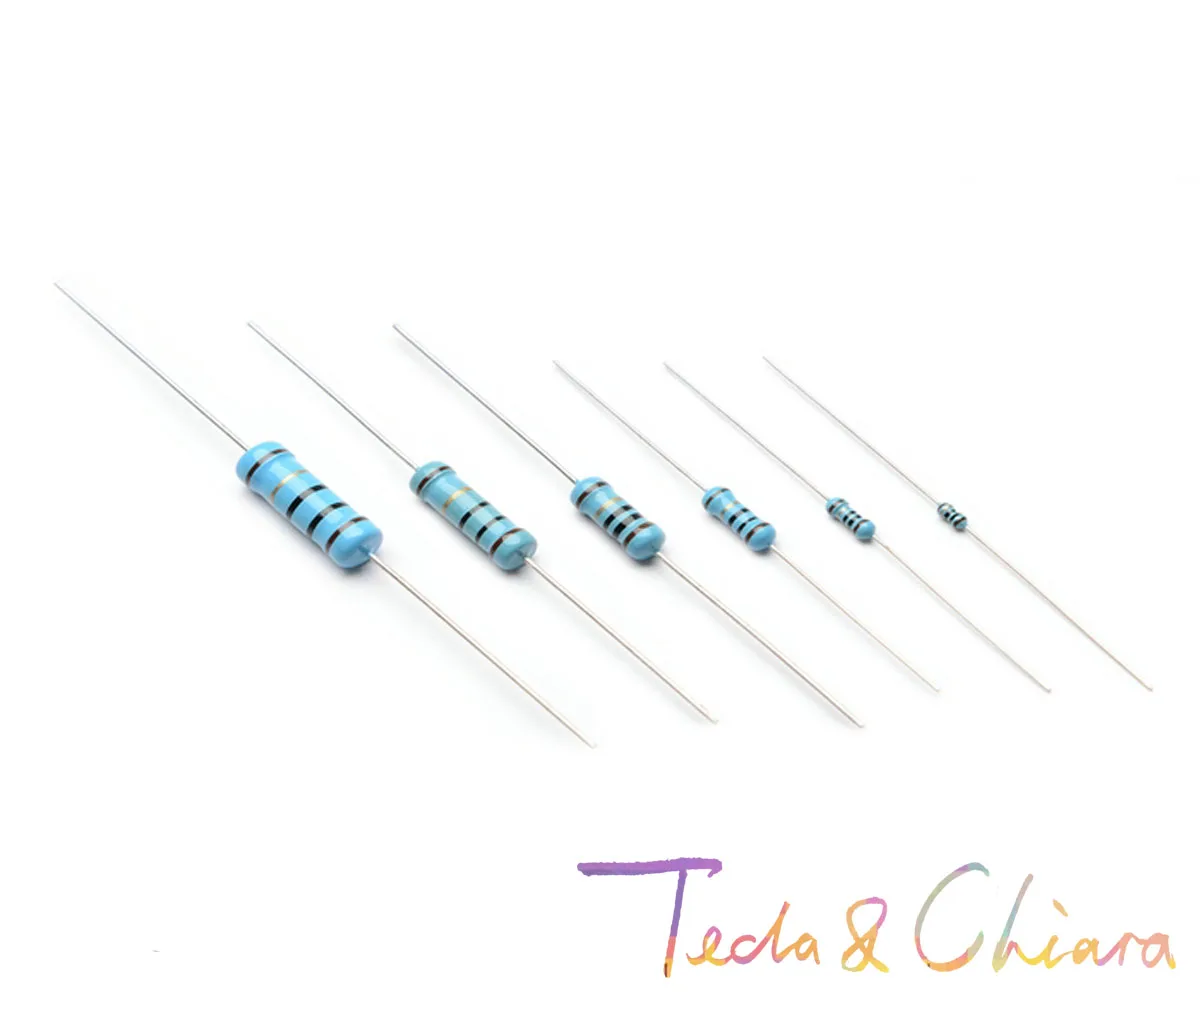 

100Pcs 3.9R 4.3R 4.7R 3.9Ohm 4.3Ohm 4.7Ohm 3.9 4.3 4.7 R Ohm 1/6W 1/8W 1% Metal Film Resistor Colored ring Resistance